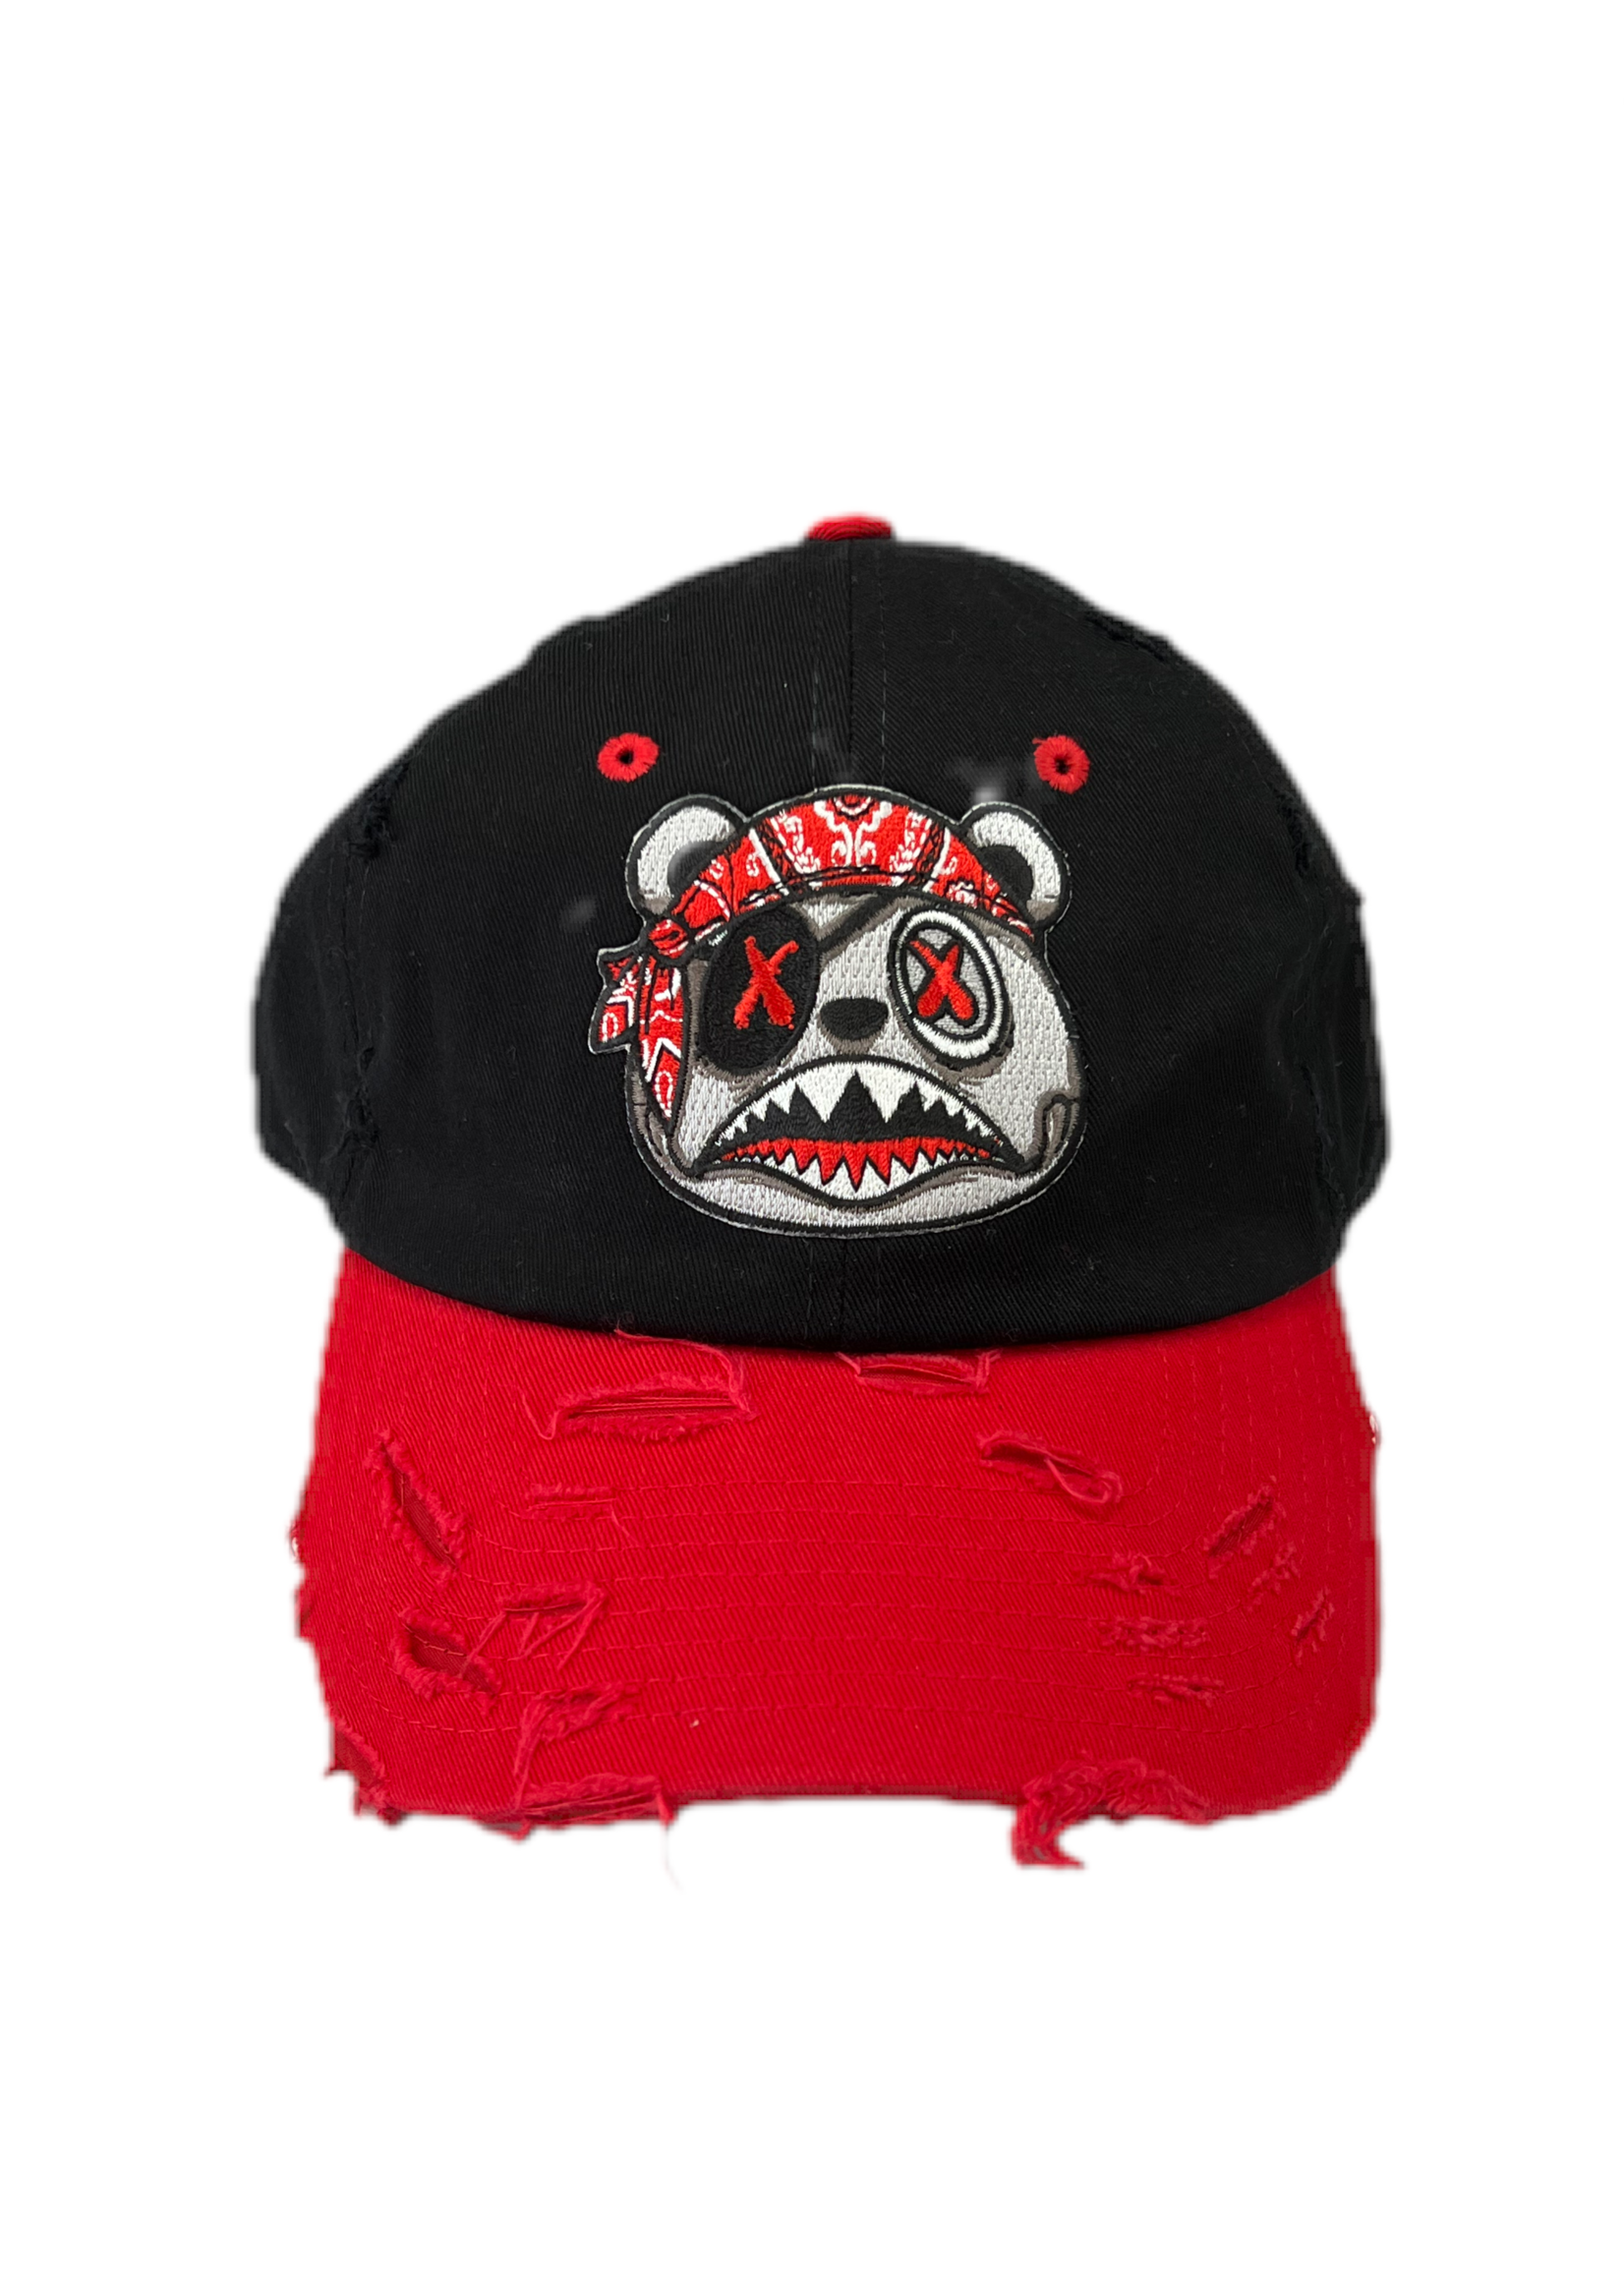 BAWS BAWS "PIRATE" HAT (Red/Black)